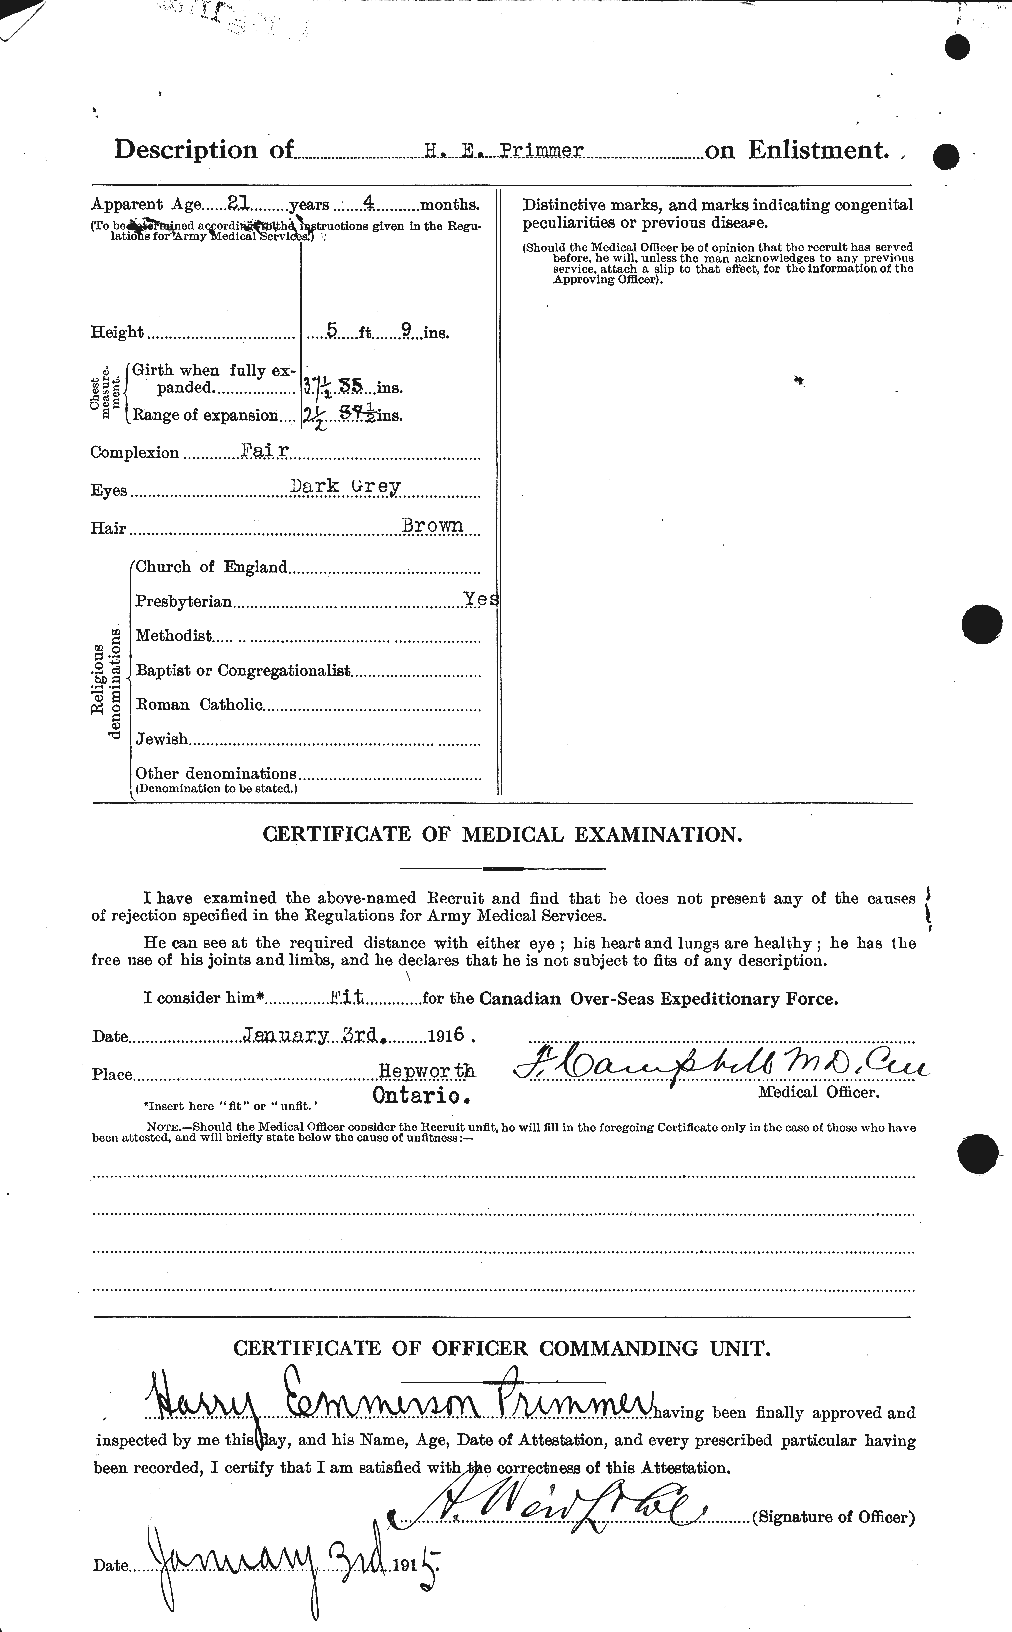 Personnel Records of the First World War - CEF 586147b